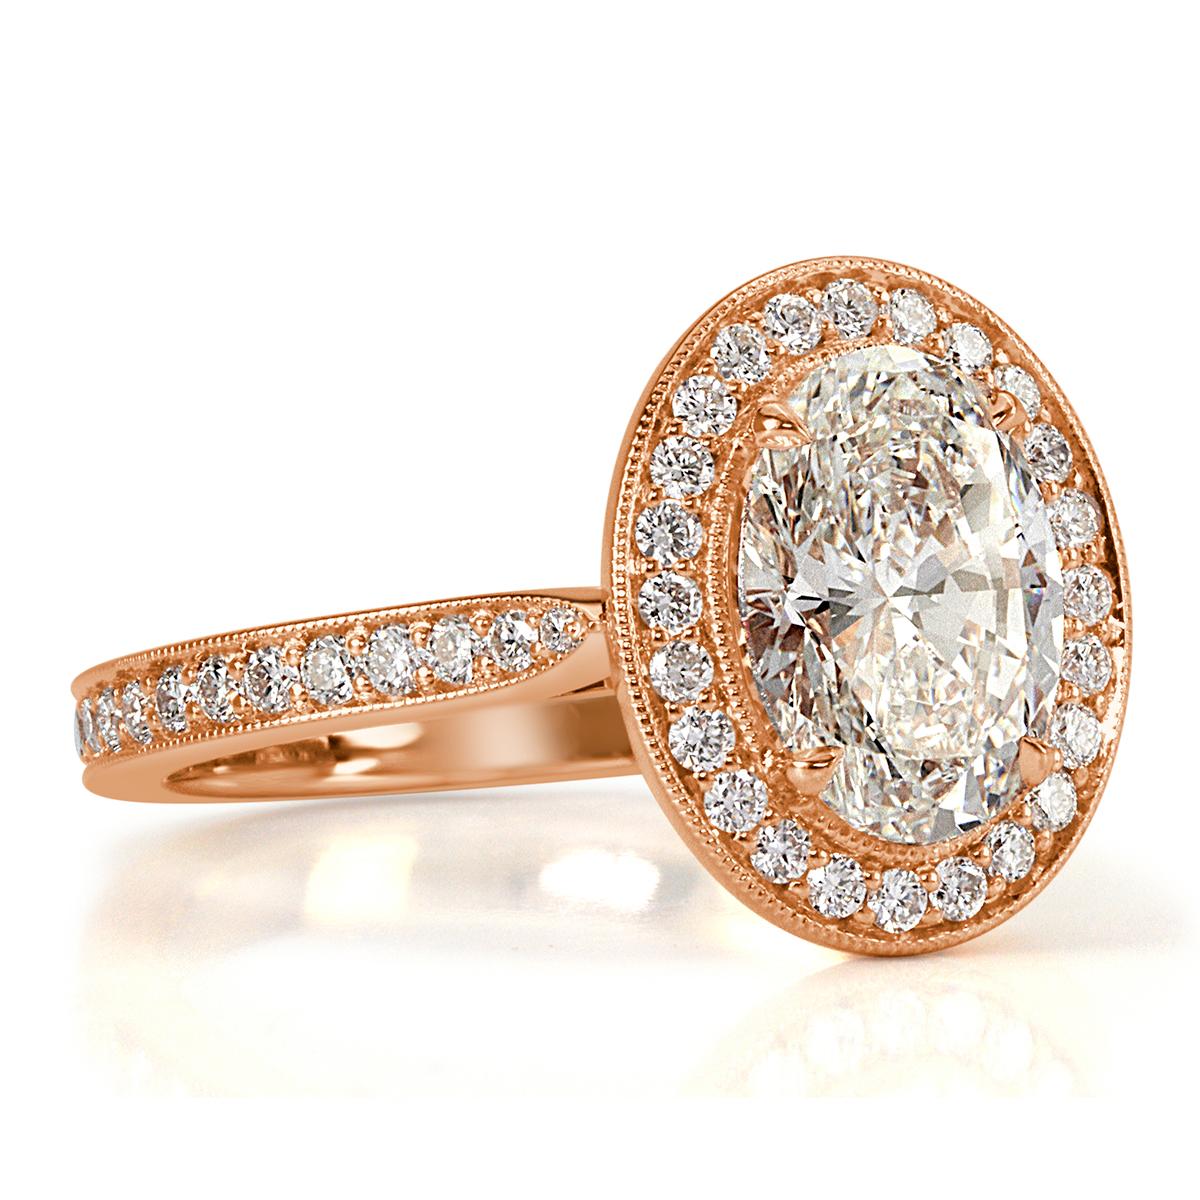 This feminine diamond engagement ring features a beautiful 1.85ct oval cut center diamond, GIA certified at I-VVS2. It is bezel set to perfection in 18k rose gold and accented by a halo of round brilliant cut diamonds as well as sparkling diamonds